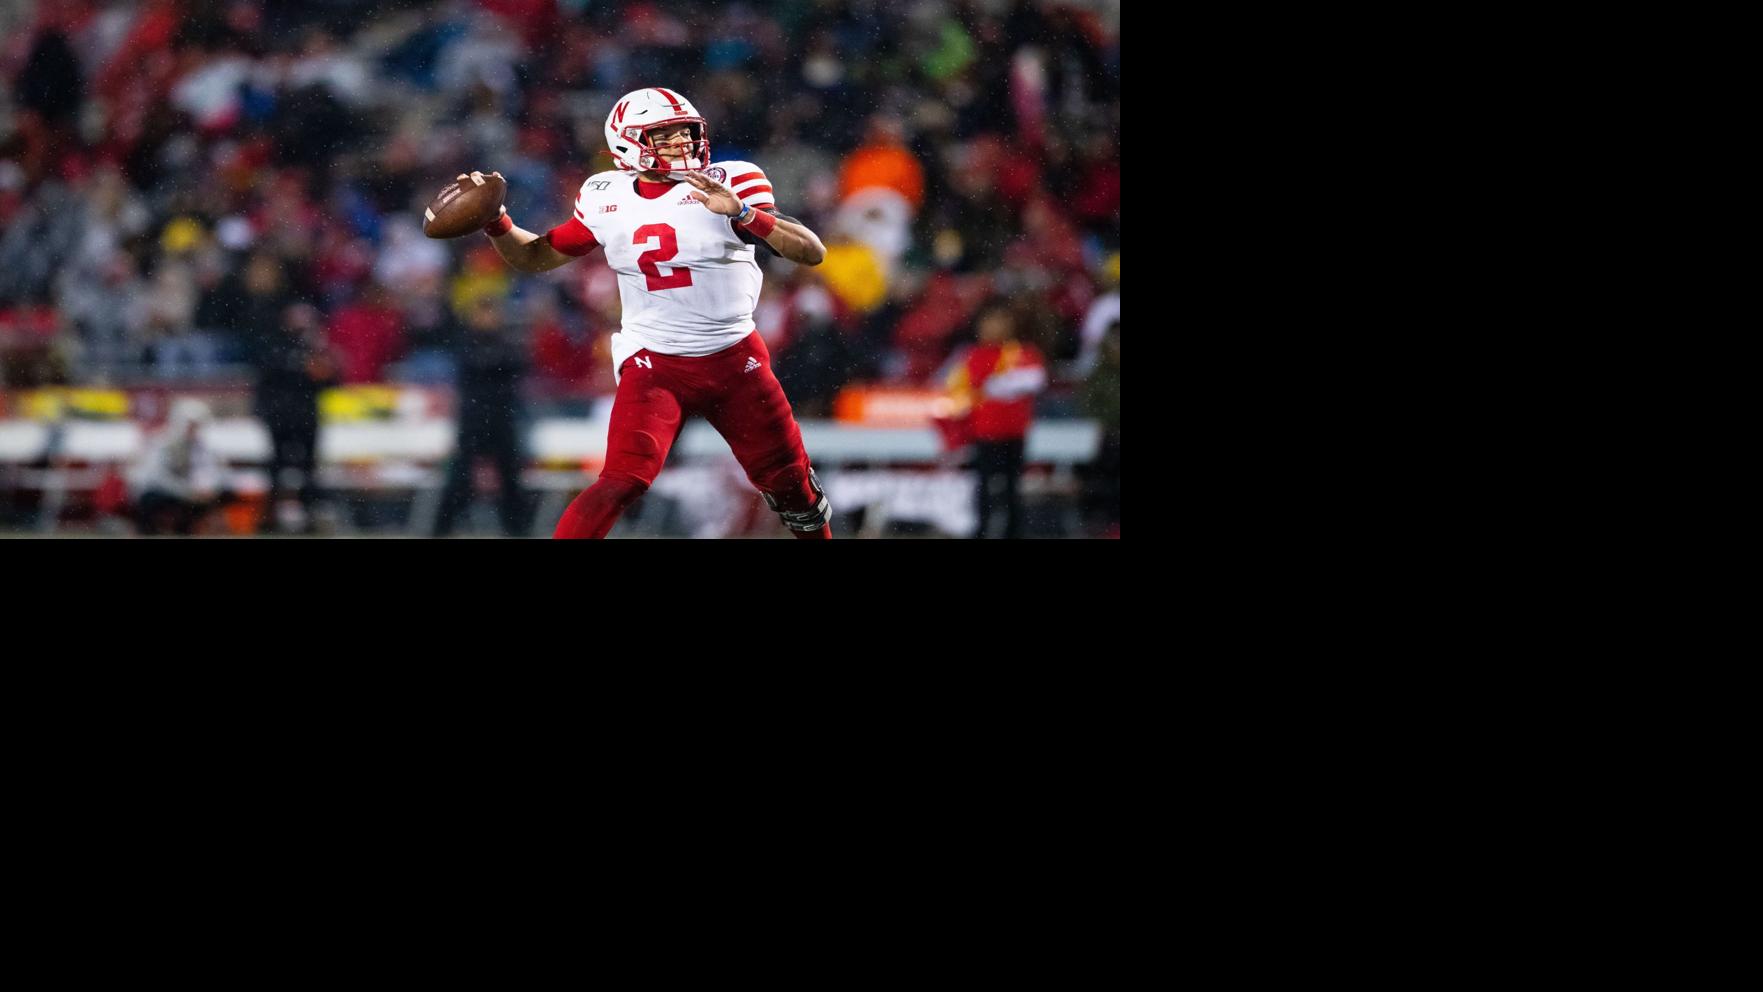 Check out Nebraska's top quarterback targets for the 2021 and 2022